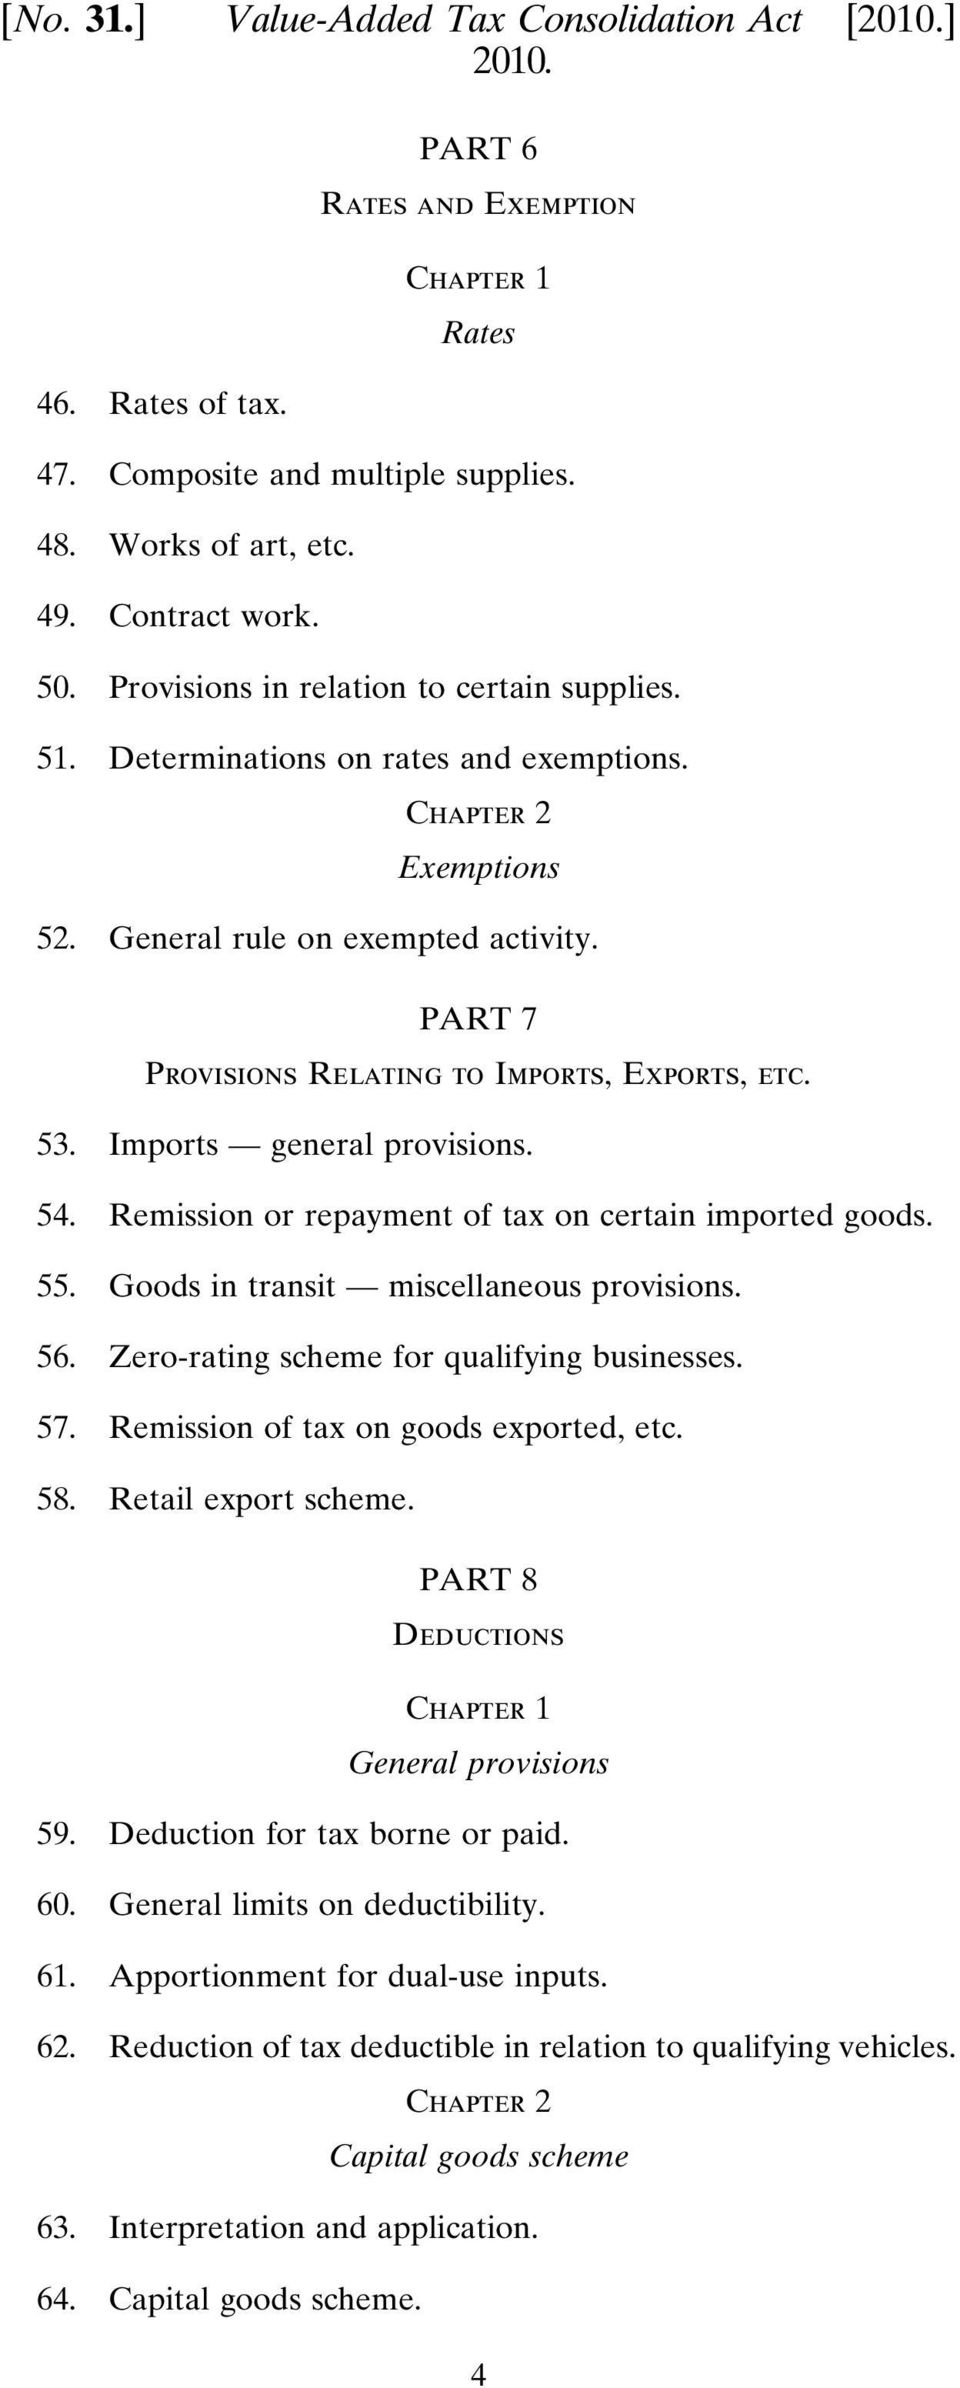 53. Imports general provisions. 54. Remission or repayment of tax on certain imported goods. 55. Goods in transit miscellaneous provisions. 56. Zero-rating scheme for qualifying businesses. 57.